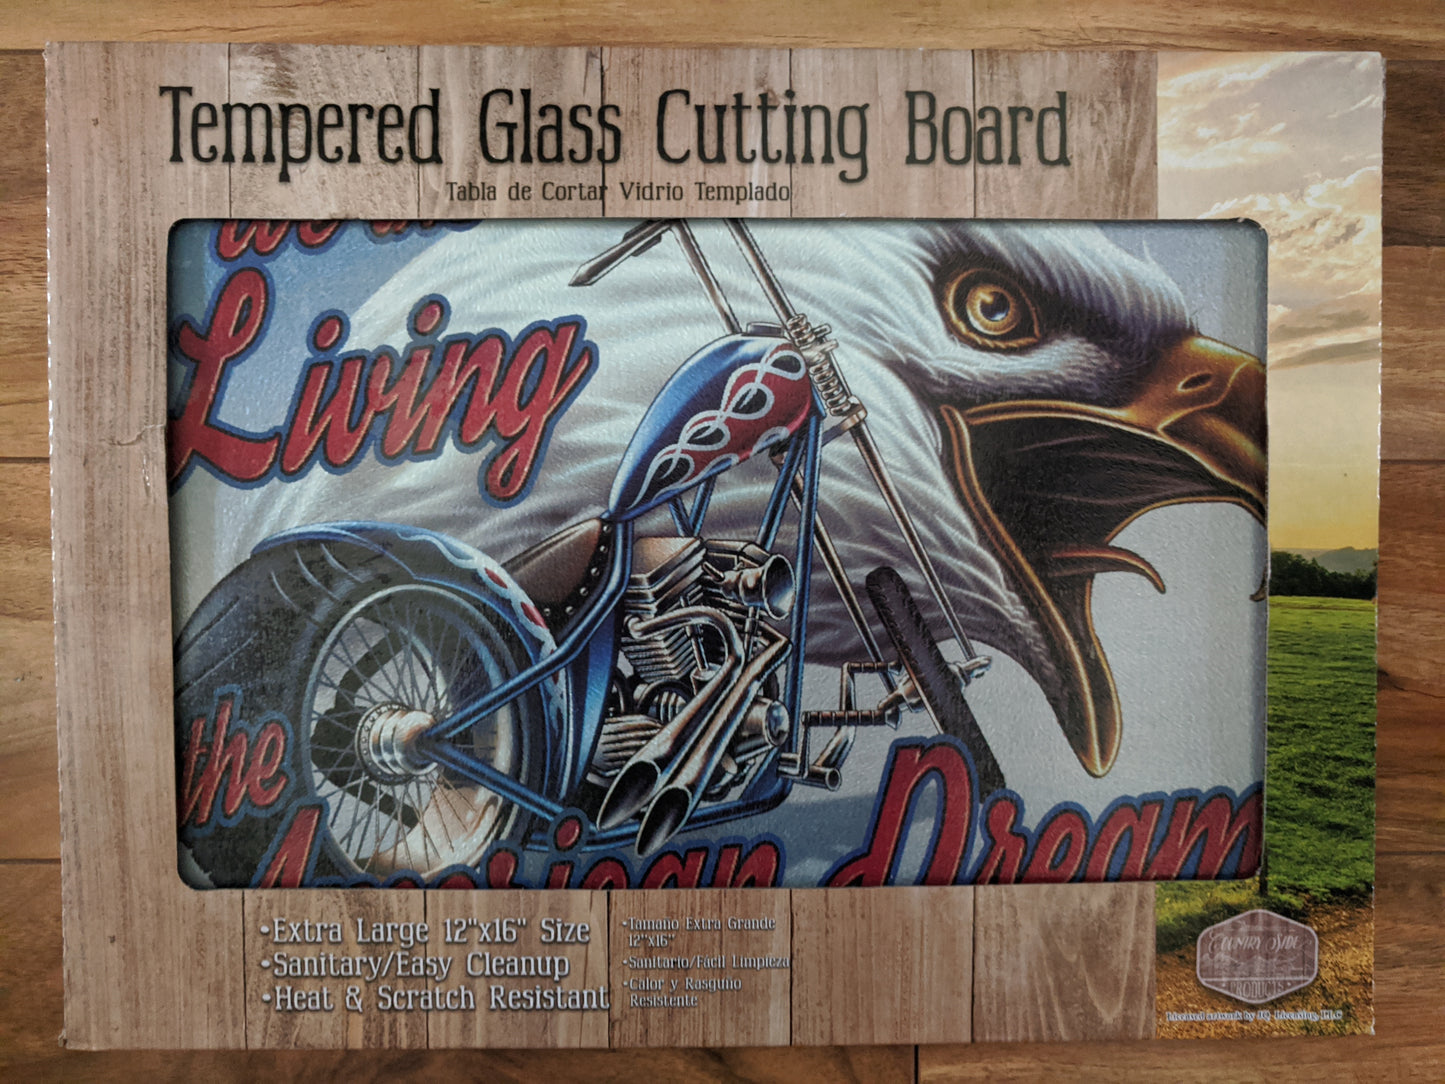 Living the American Dream Tempered Glass Cutting Board 12"x16"